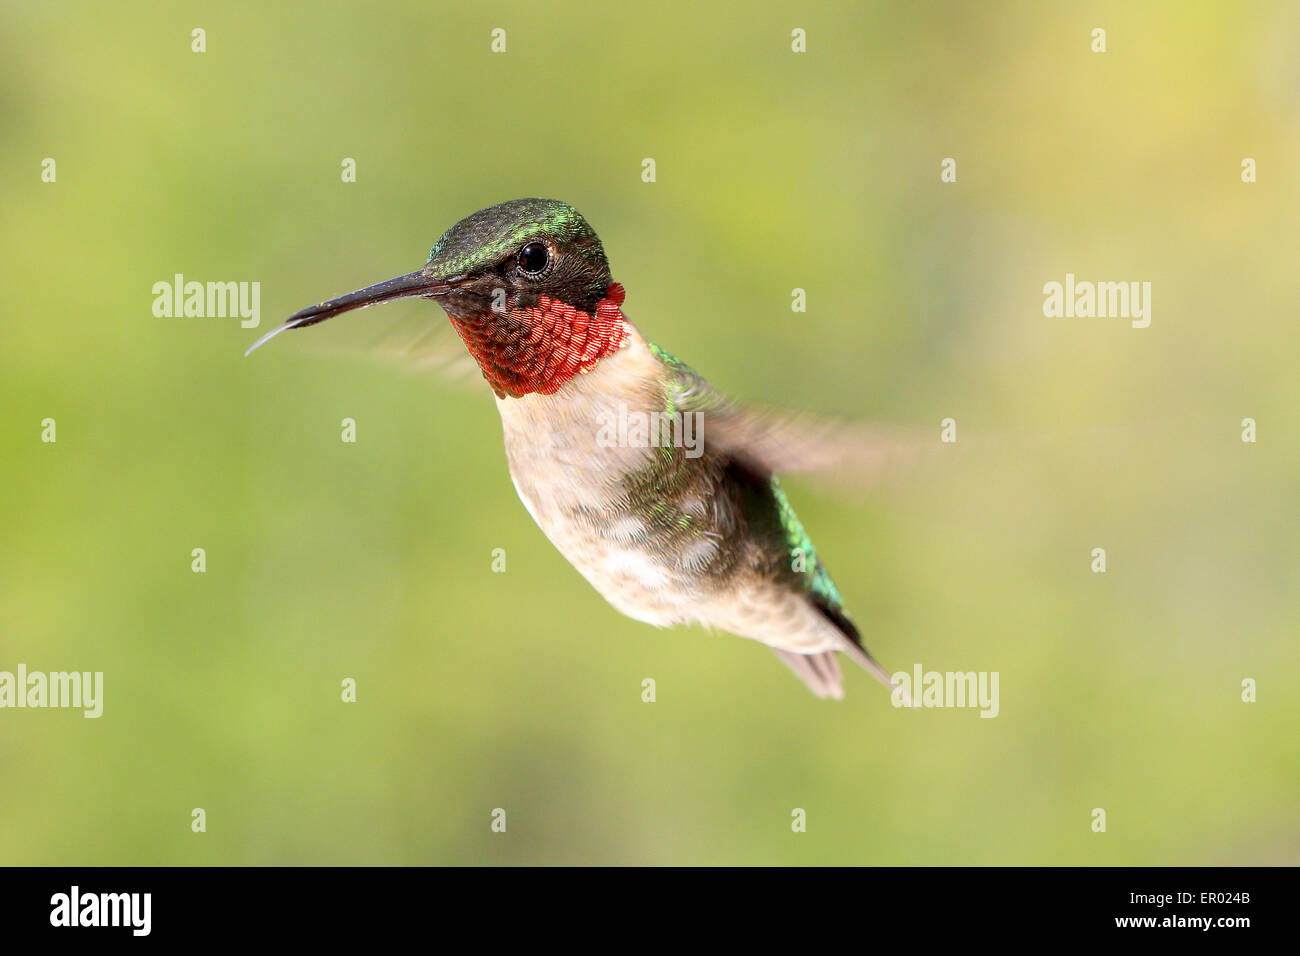 Hummingbird ruby-throated, Archilochus colubris, male flying and displaying red throat. Stock Photo